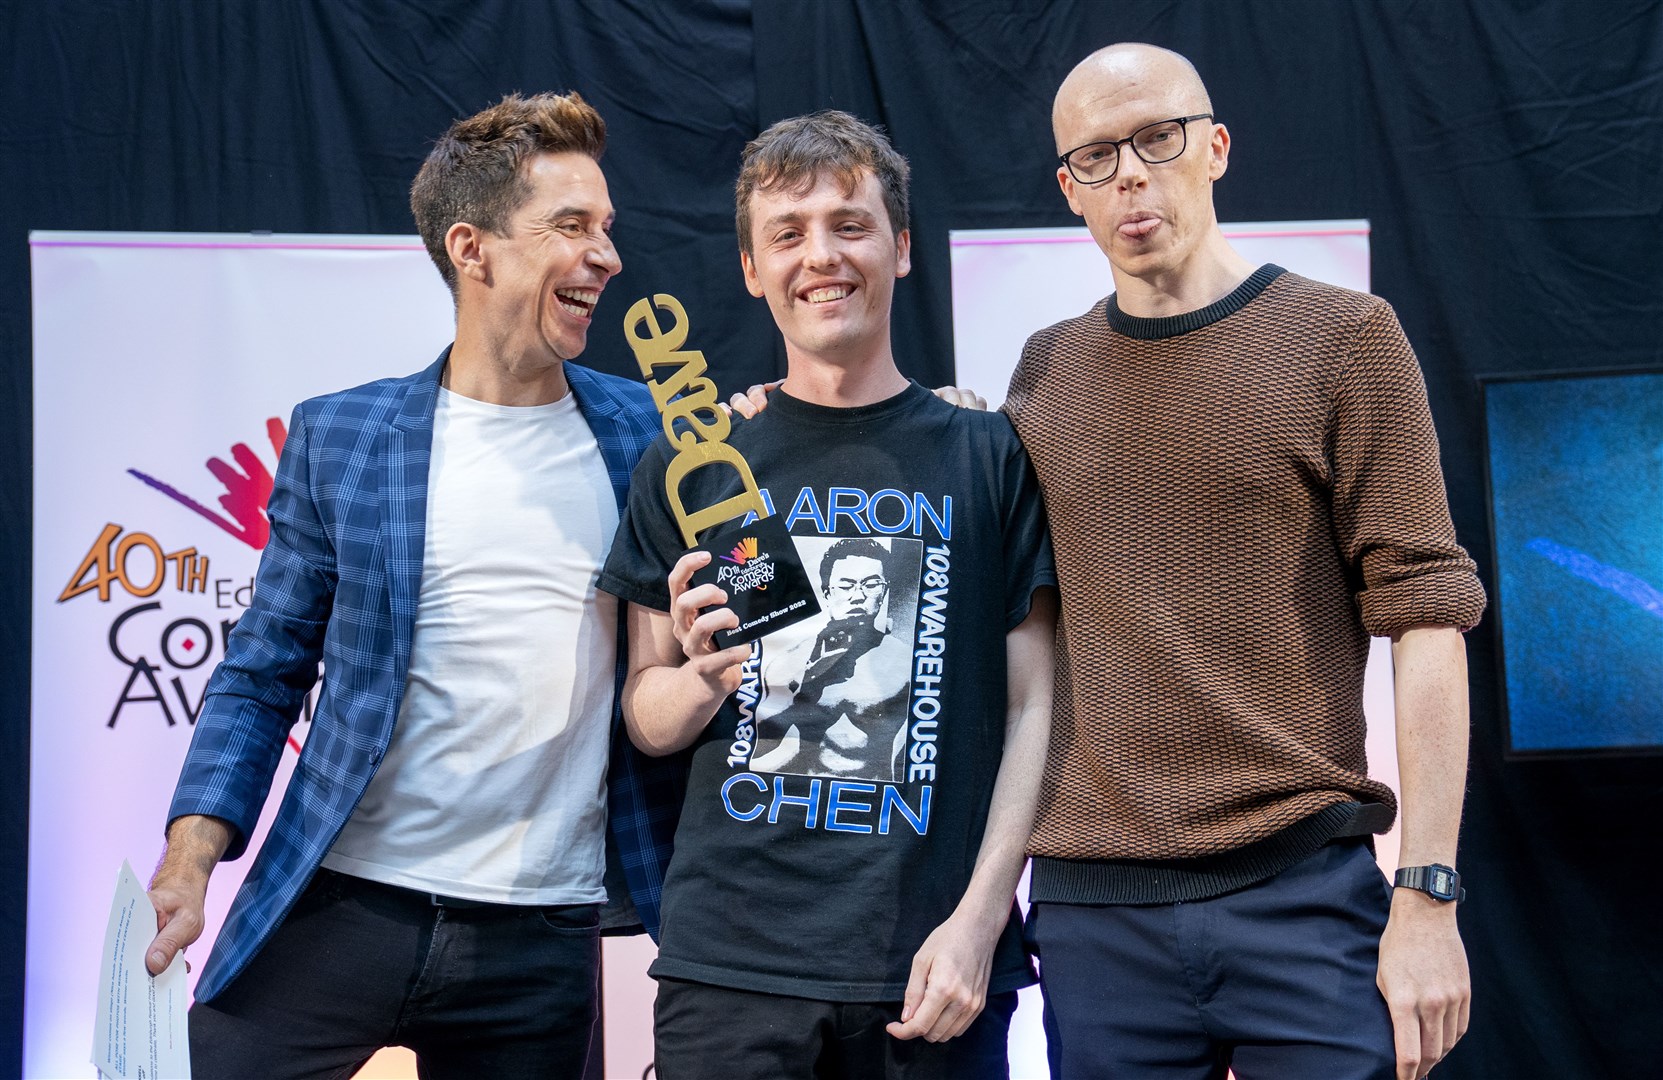 Sam Campbell was presented with his award by Russell Kane and Jordan Brookes (Jane Barlow/PA)